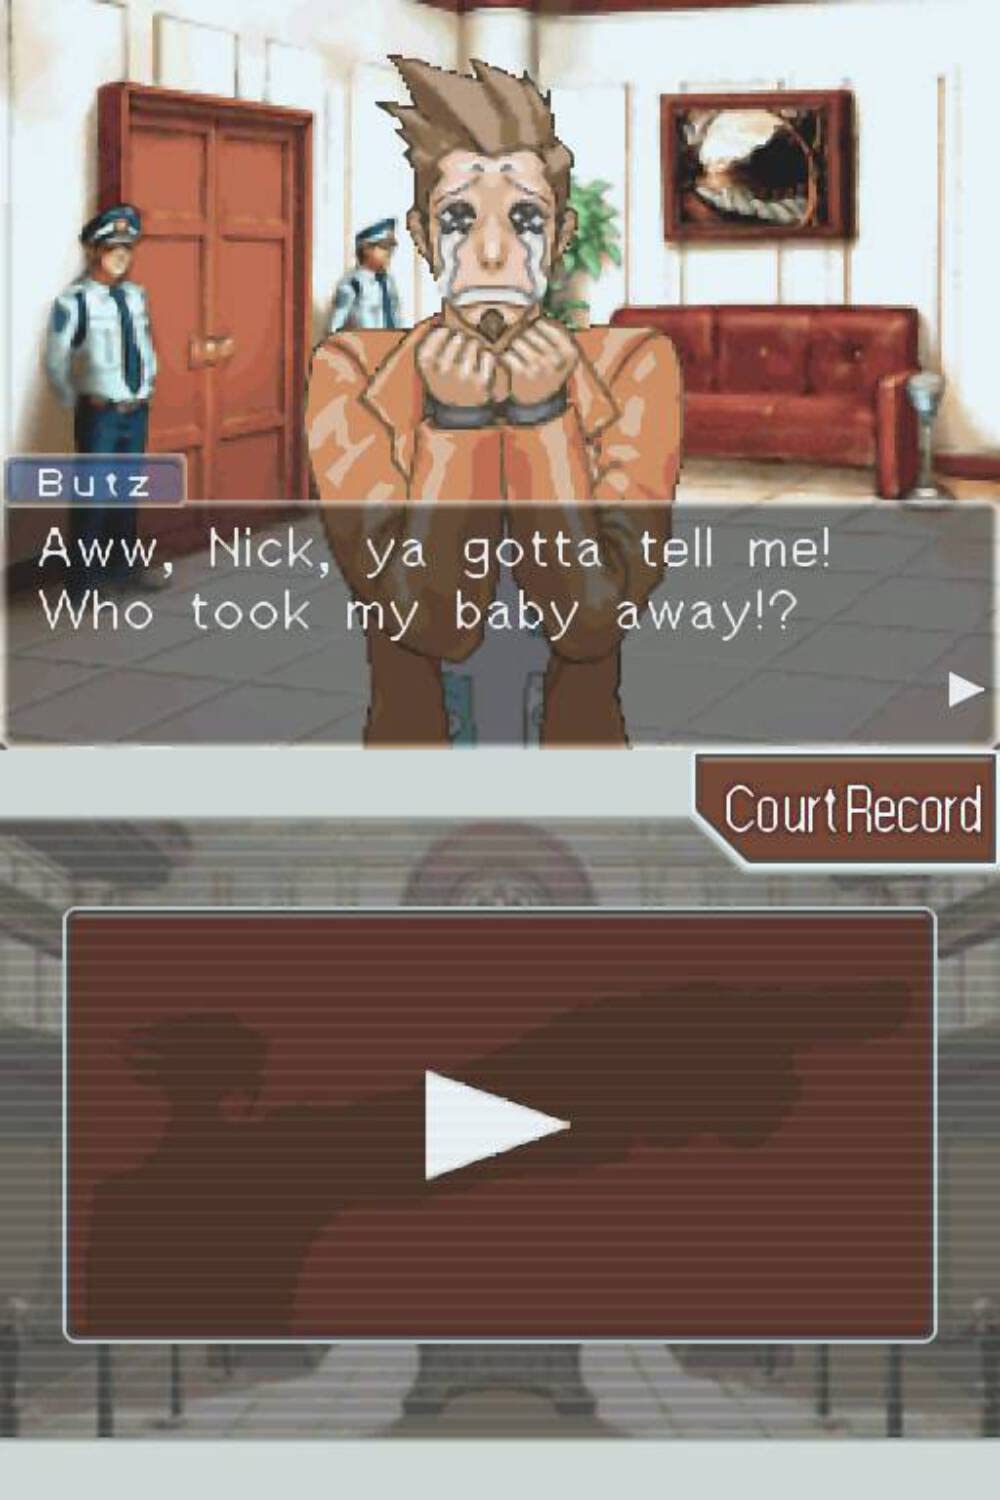 Phoenix Wright: Ace Attorney NDS - image 3 of 7